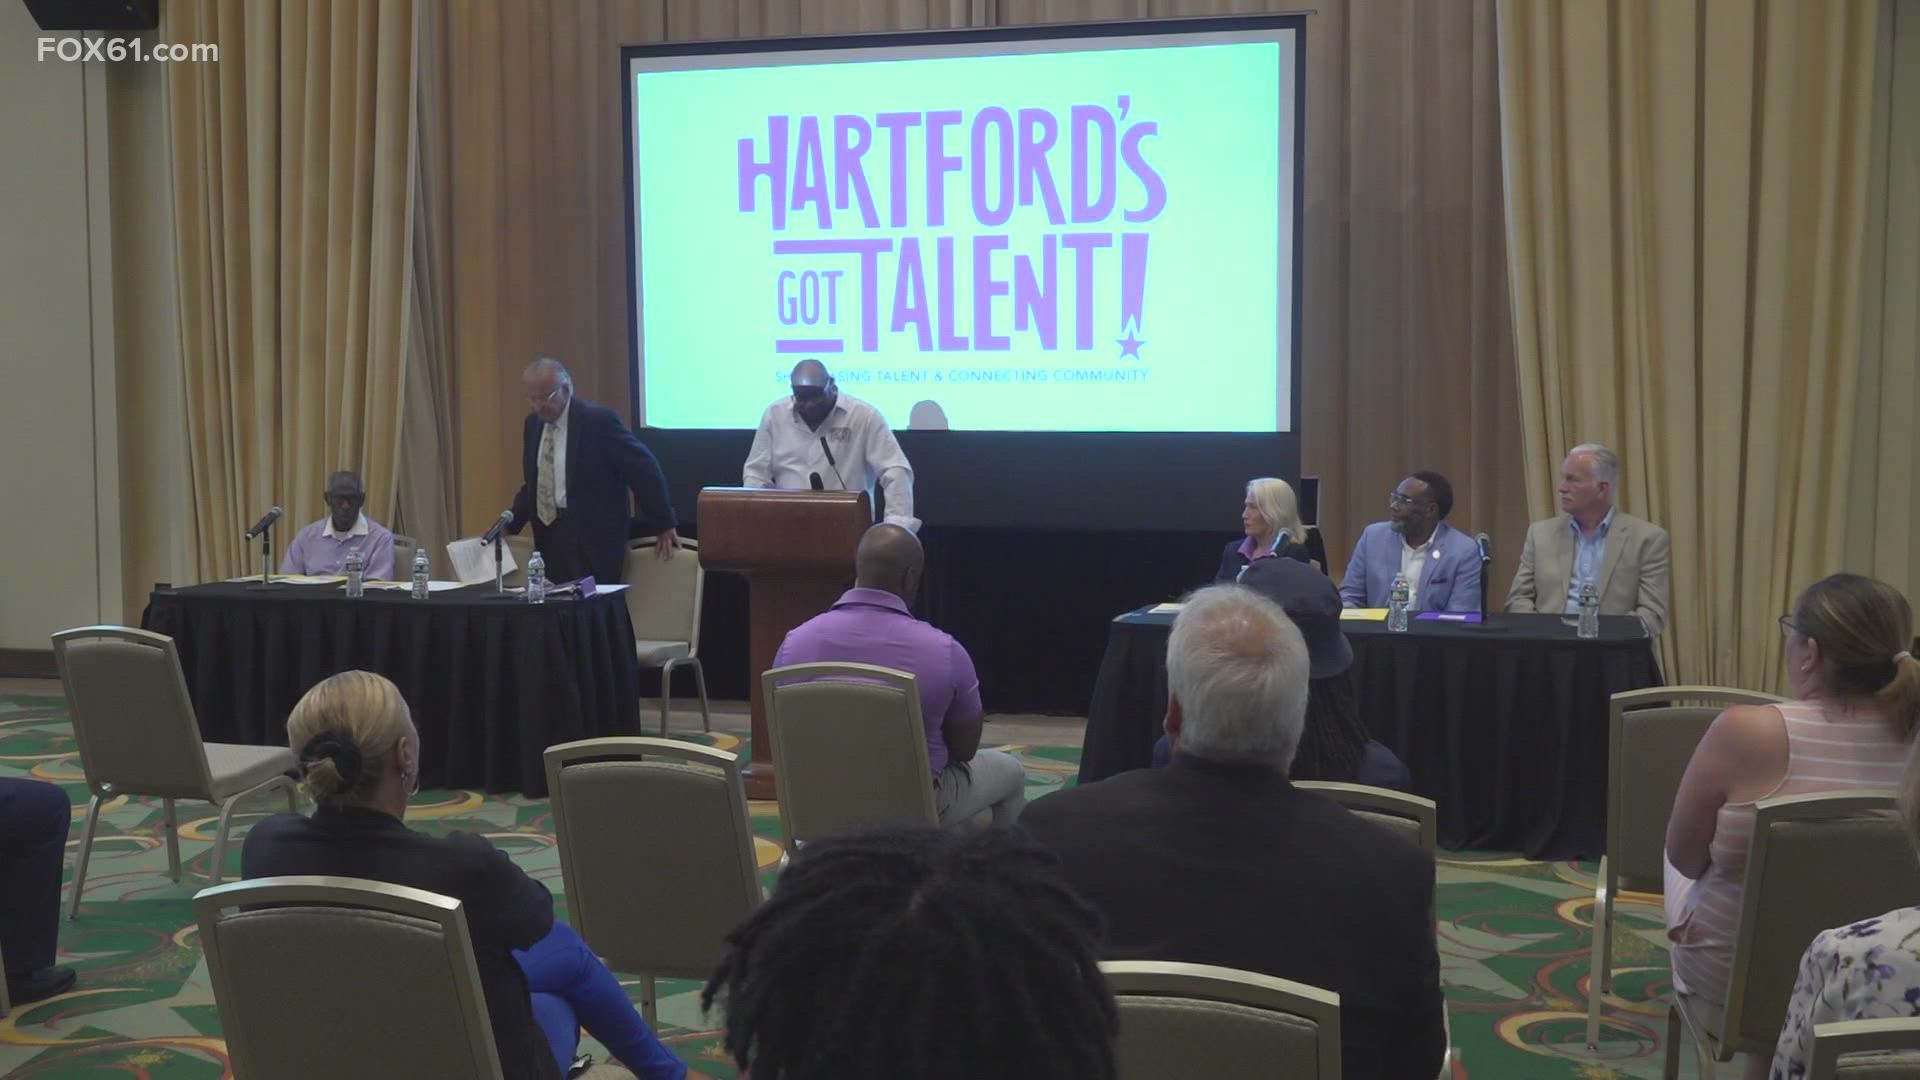 As a way to develop the town and showcase talent Hartford's Got Talent will bring together the community.